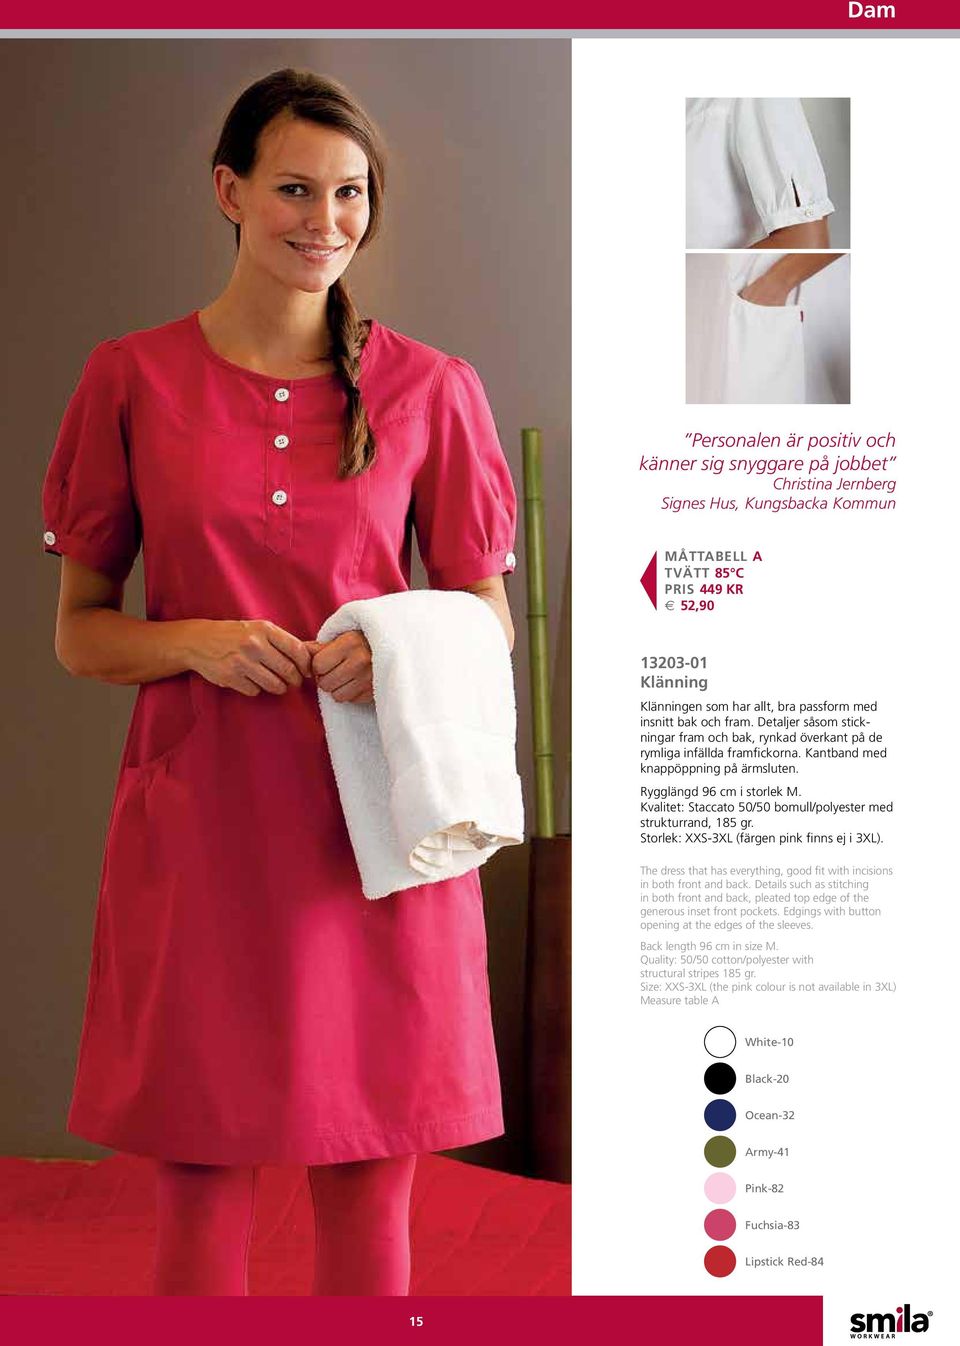 Kvalitet: Staccato 50/50 bomull/poly ester med strukturrand, 185 gr. Storlek: XXS-3XL (färgen pink finns ej i 3XL). The dress that has everything, good fit with incisions in both front and back.